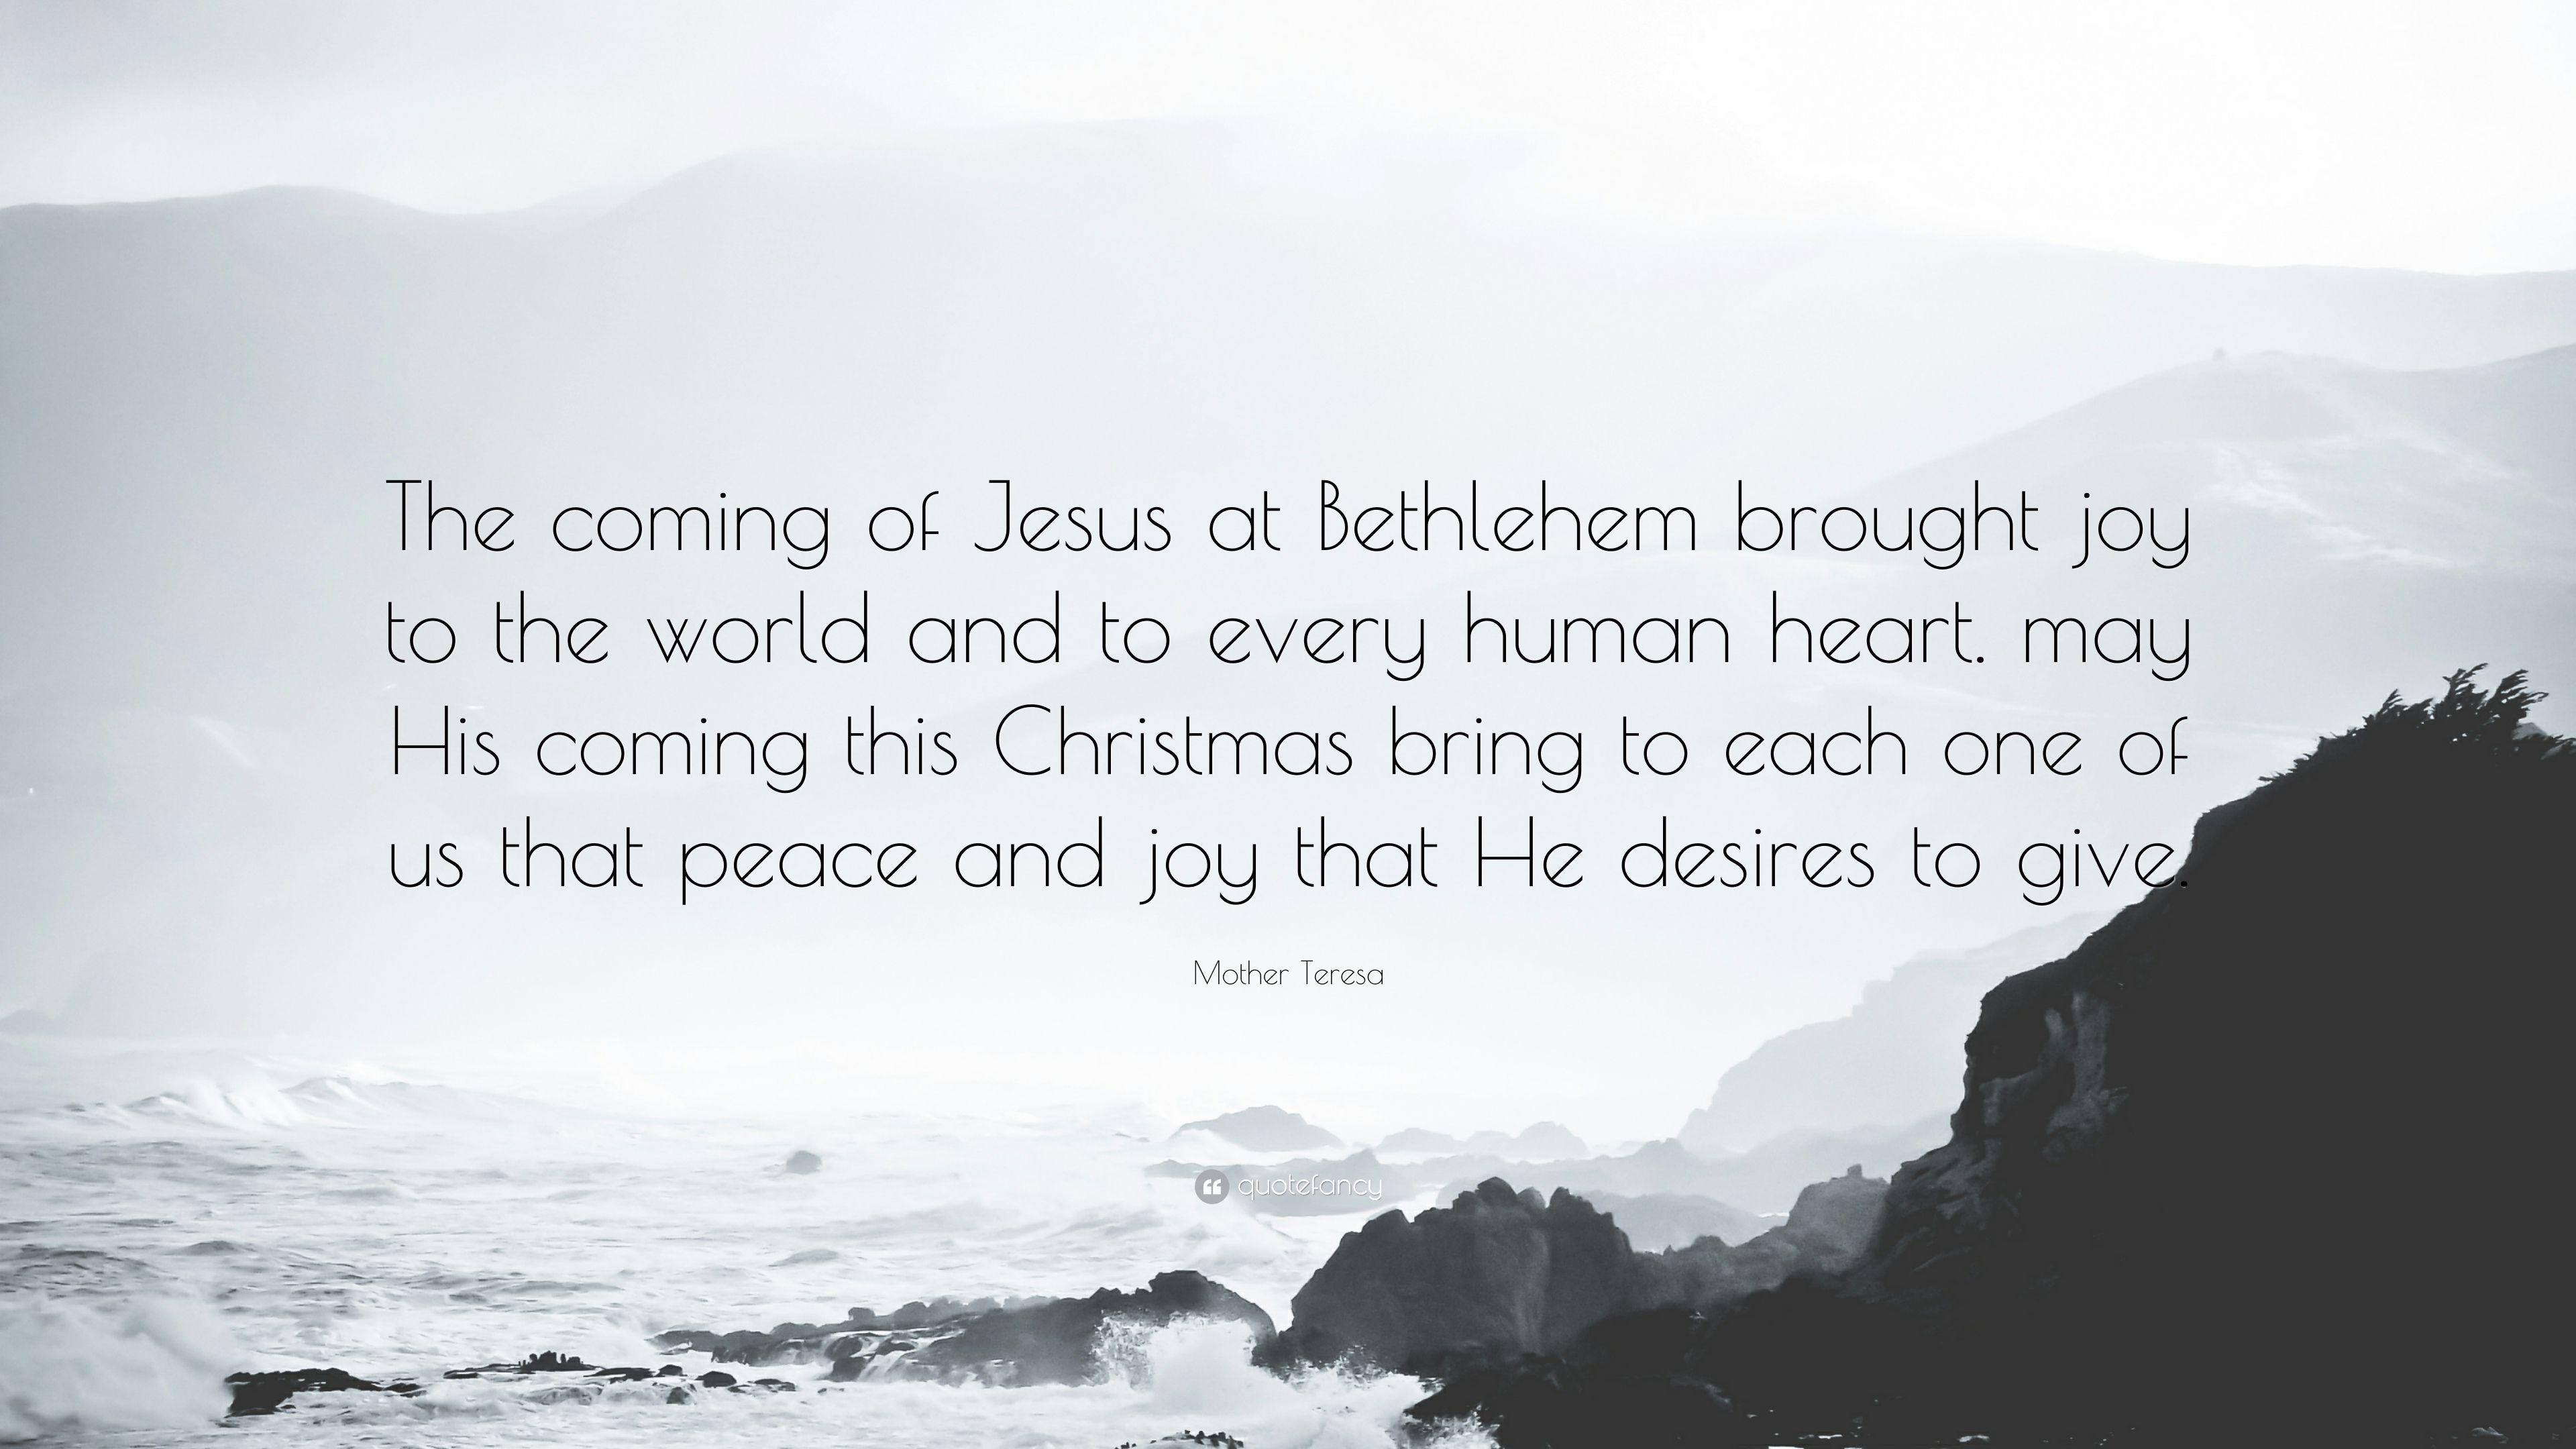 Mother Teresa Quote: “The coming of Jesus at Bethlehem brought joy